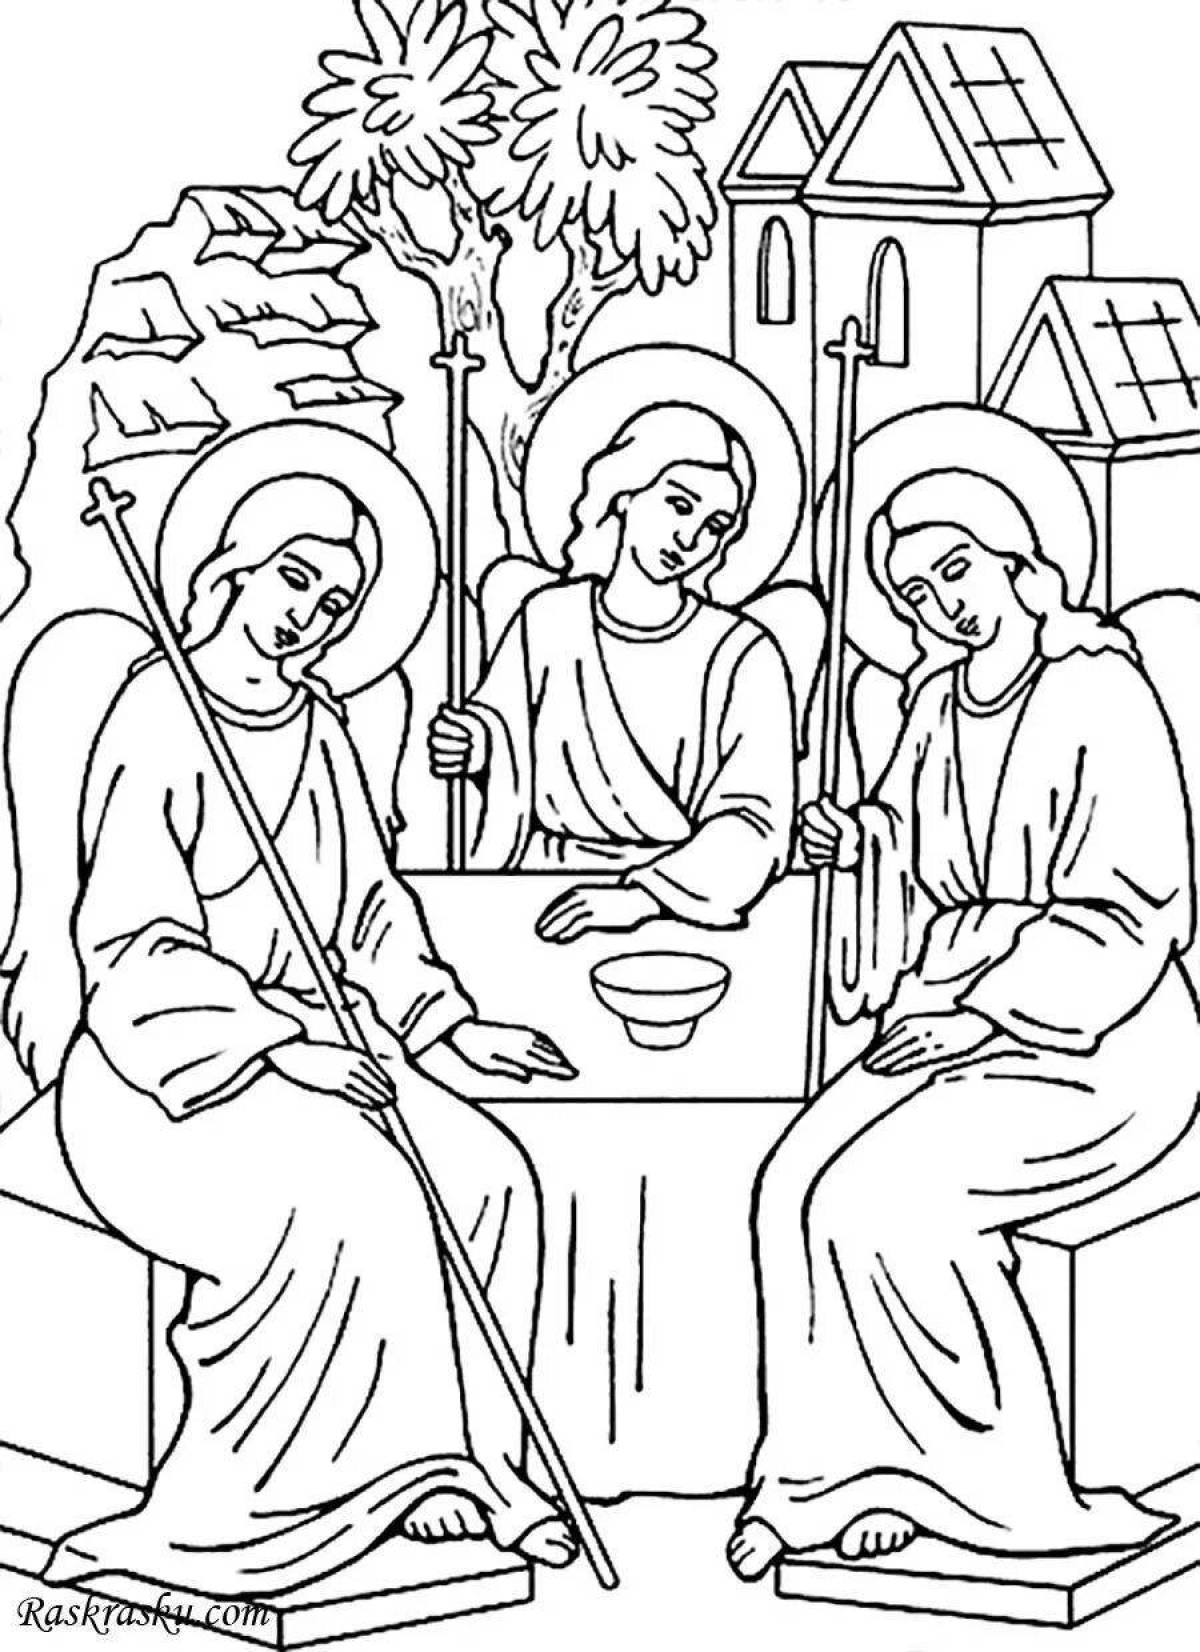 Majestic orthodox coloring book